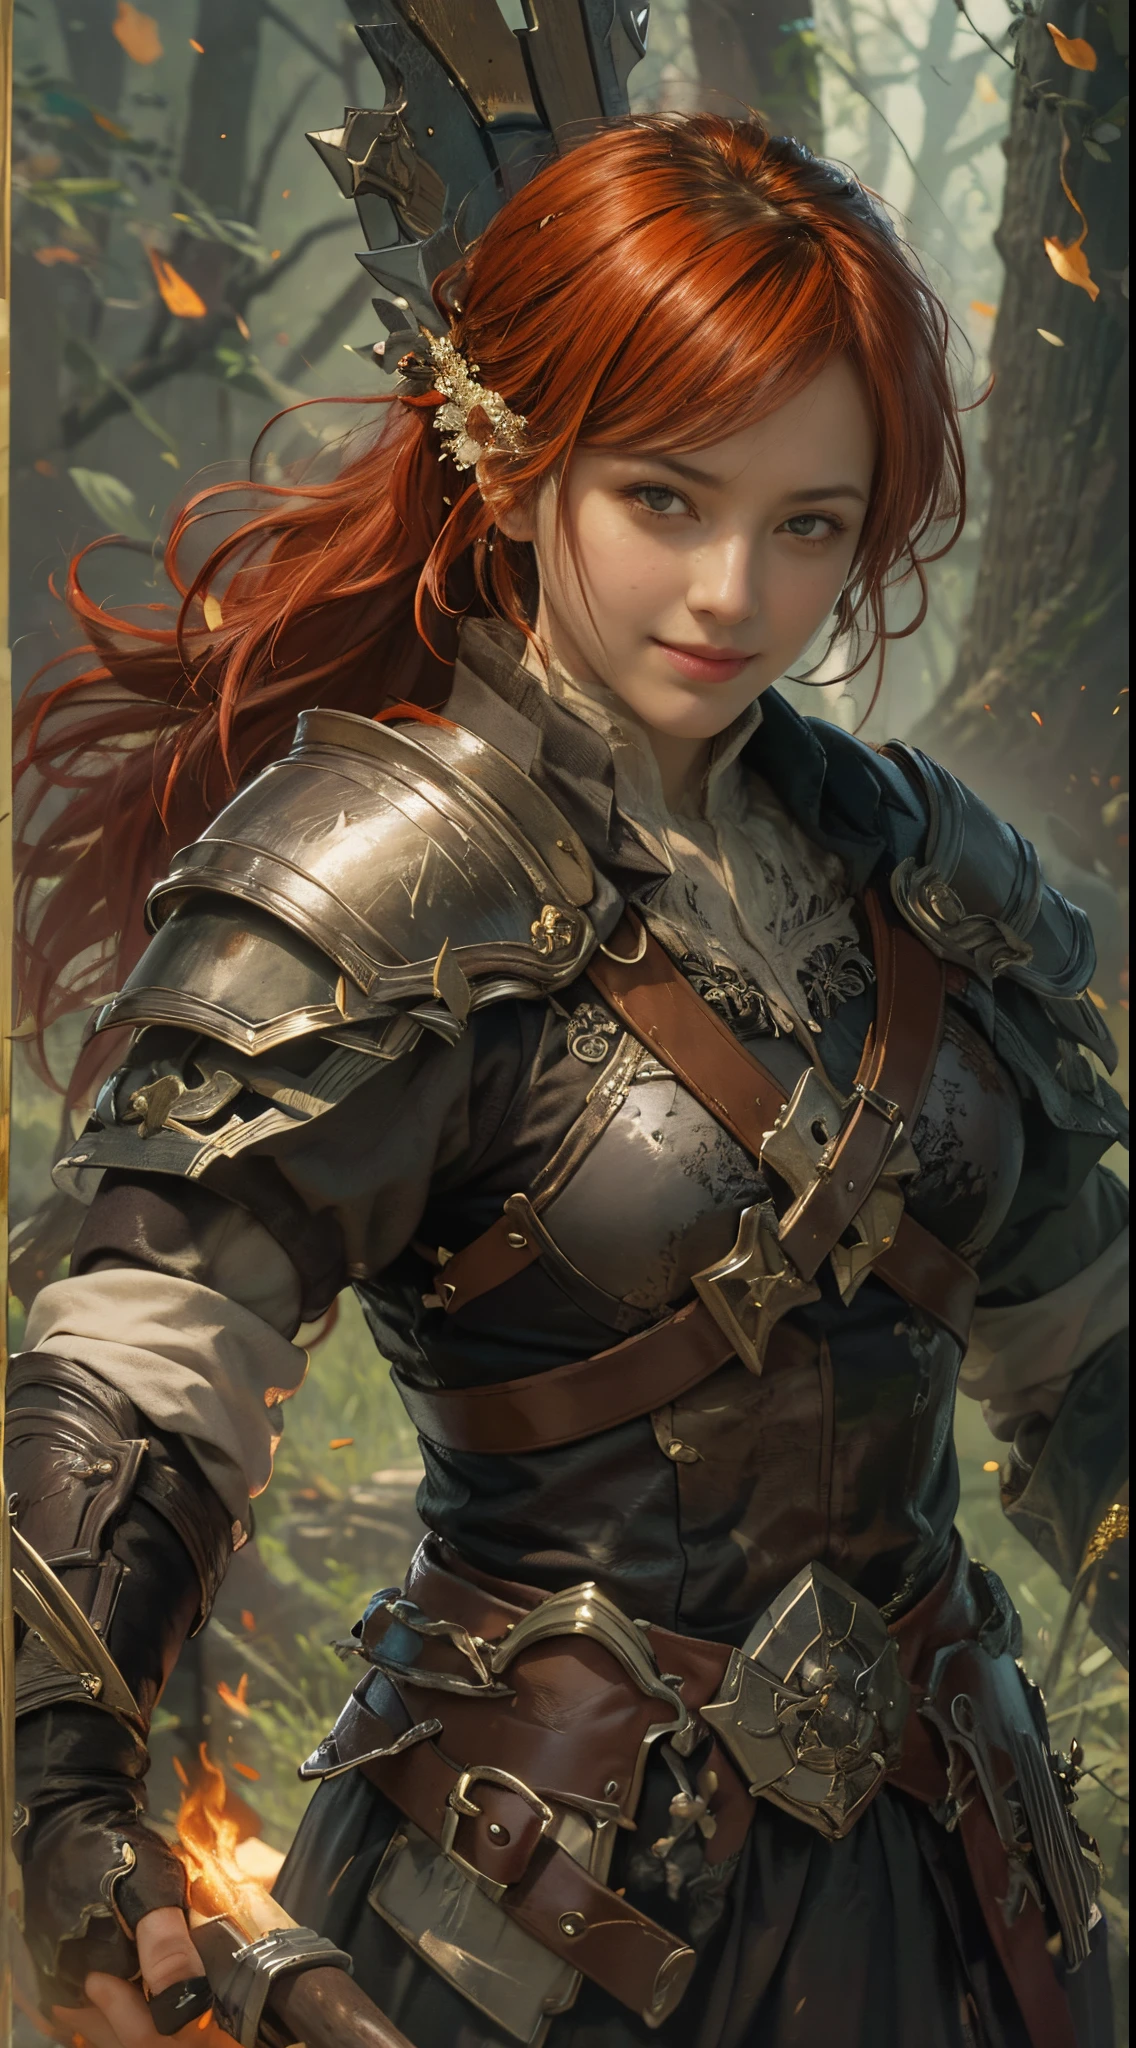 8k, best quality, highres, realistic, real person, A warrior facing a demon lord, more lightly armored this time, with a mischievous, cunning smile. The warrior has short red hair and wields a large, ornately decorated axe. The setting is a fantasy battleground. The warrior's pose is more relaxed and sly, reflecting their crafty personality. The background includes magical effects and a dark, ominous atmosphere, emphasizing the ongoing battle. StarkFrieren